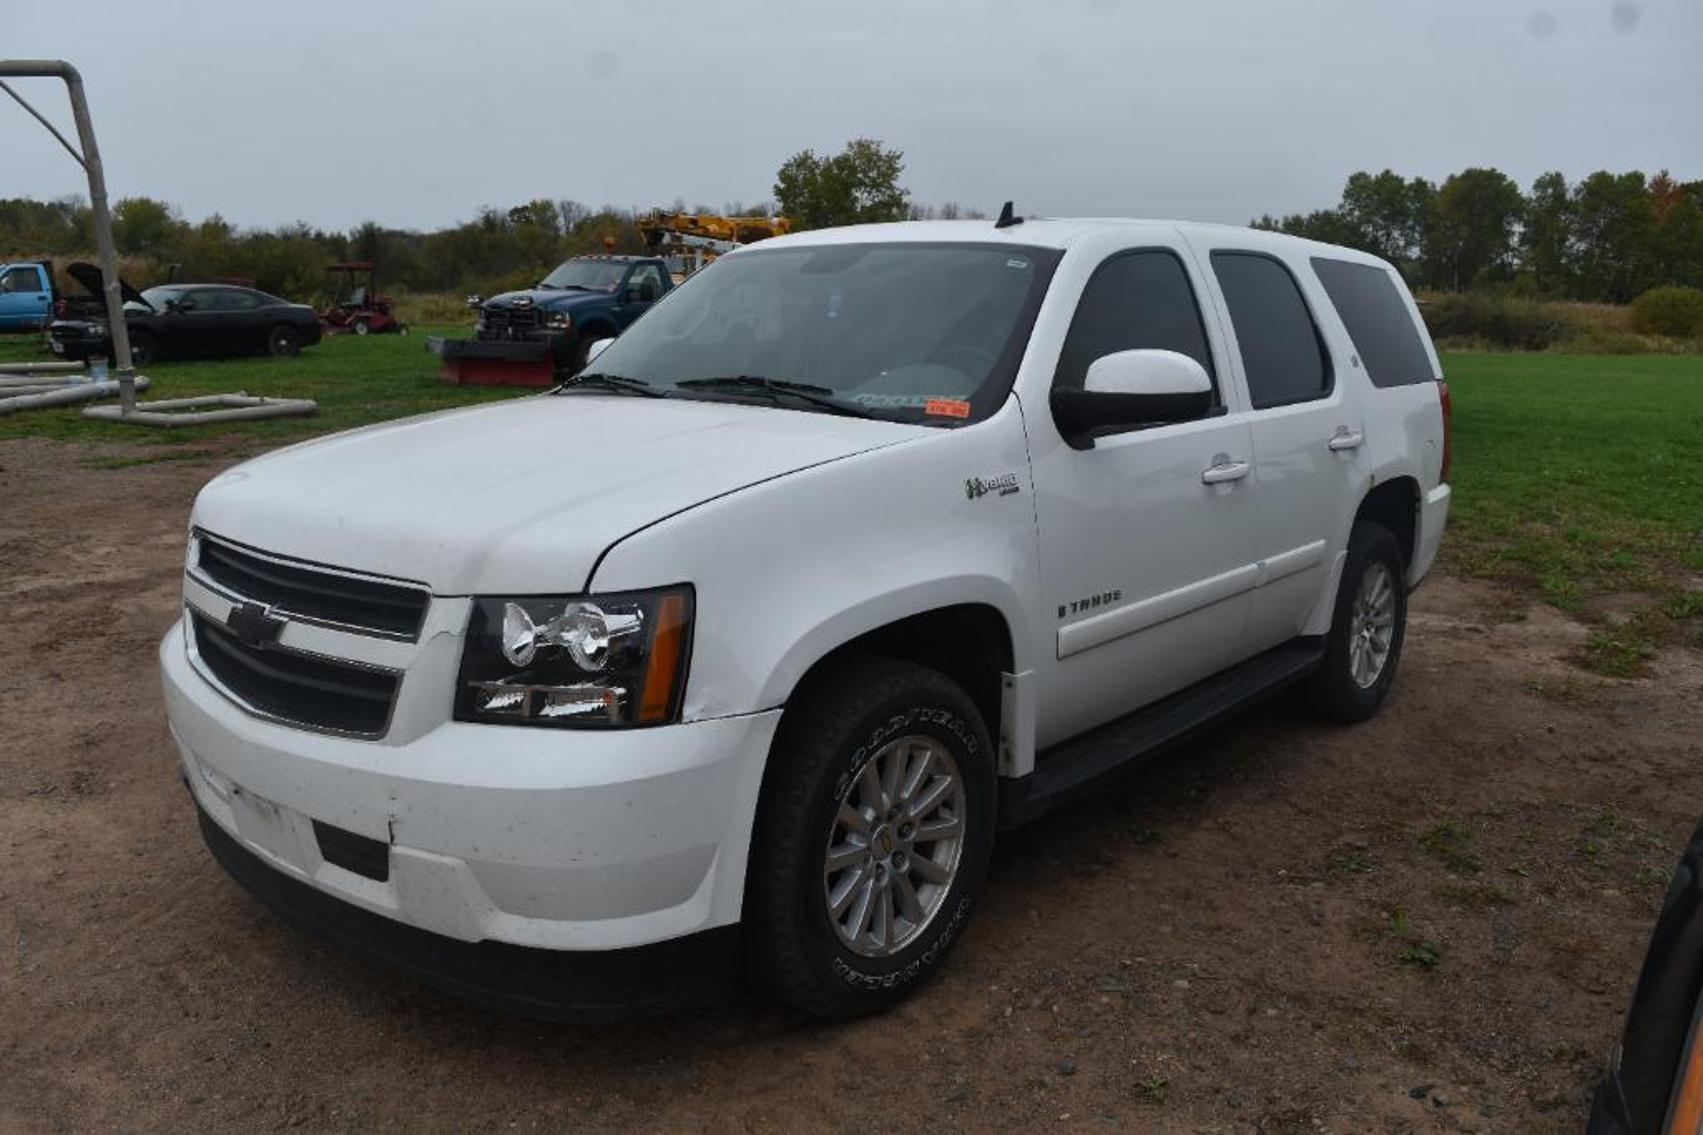 2008 Chevrolet Tahoe Hybrid, 2006 Buick Lucerne, (2) Ford  Taurus & 2010 Chrysler Town and Country, 2008 Cadillac Escalade